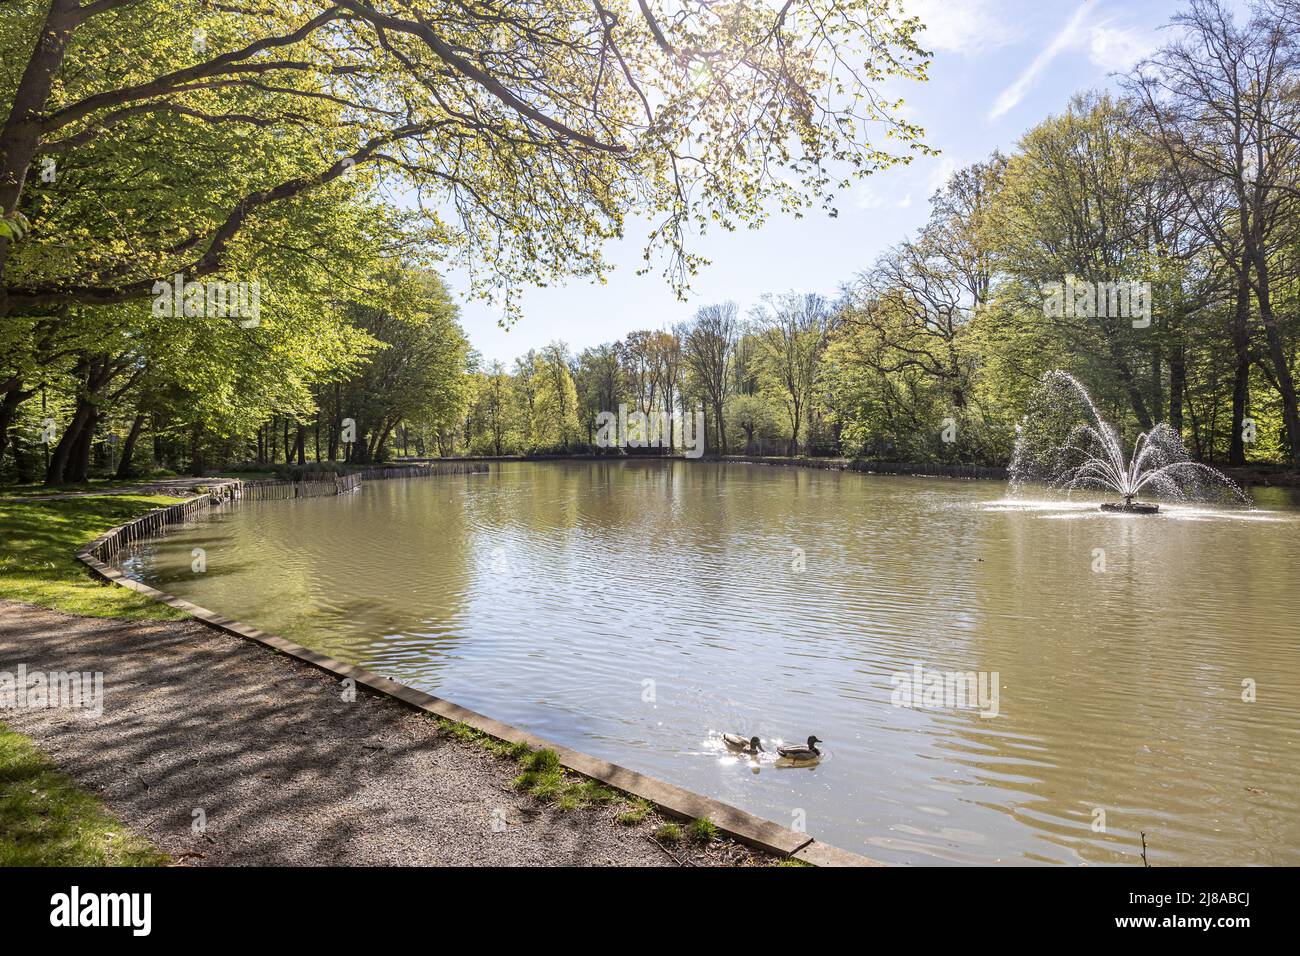 Peaceful scene of a pond with calm water with a fountain and two ducks, lush green trees in the background, sunny spring day at Heidekamp park in Stei Stock Photo